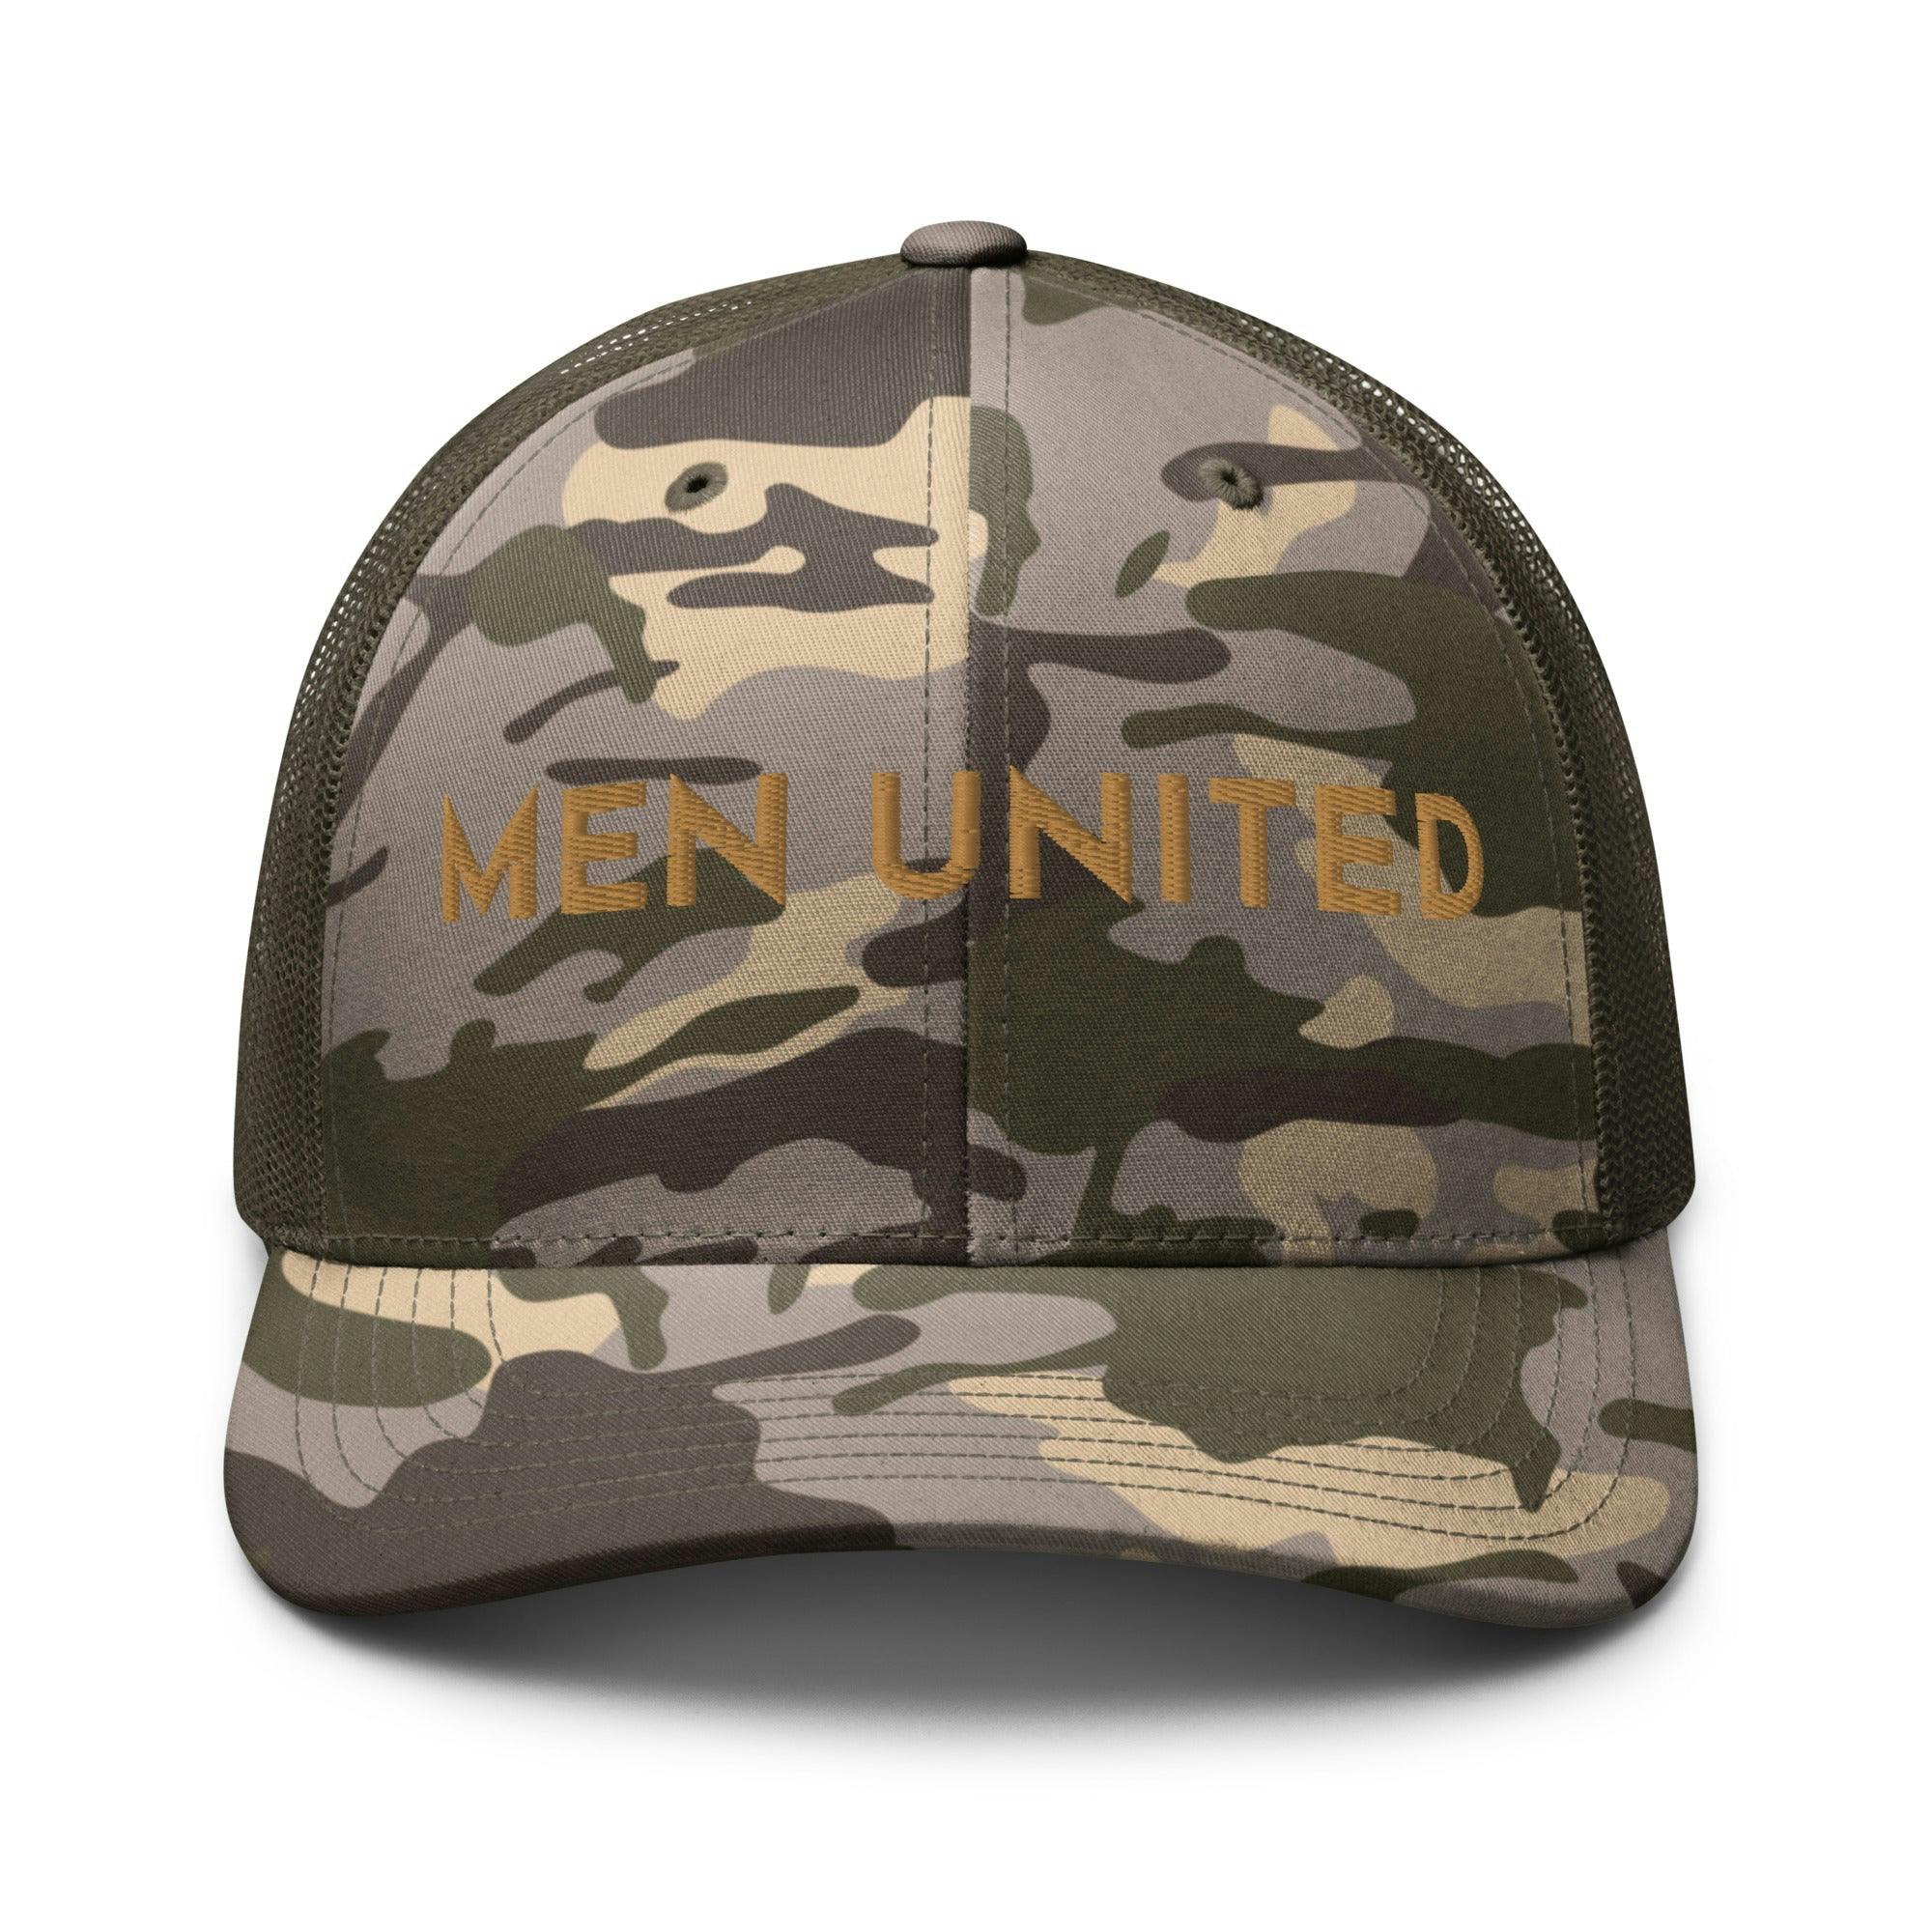 Camouflage trucker hat - camouflage-trucker-hat-camo-olive-front-654a98fba4cde